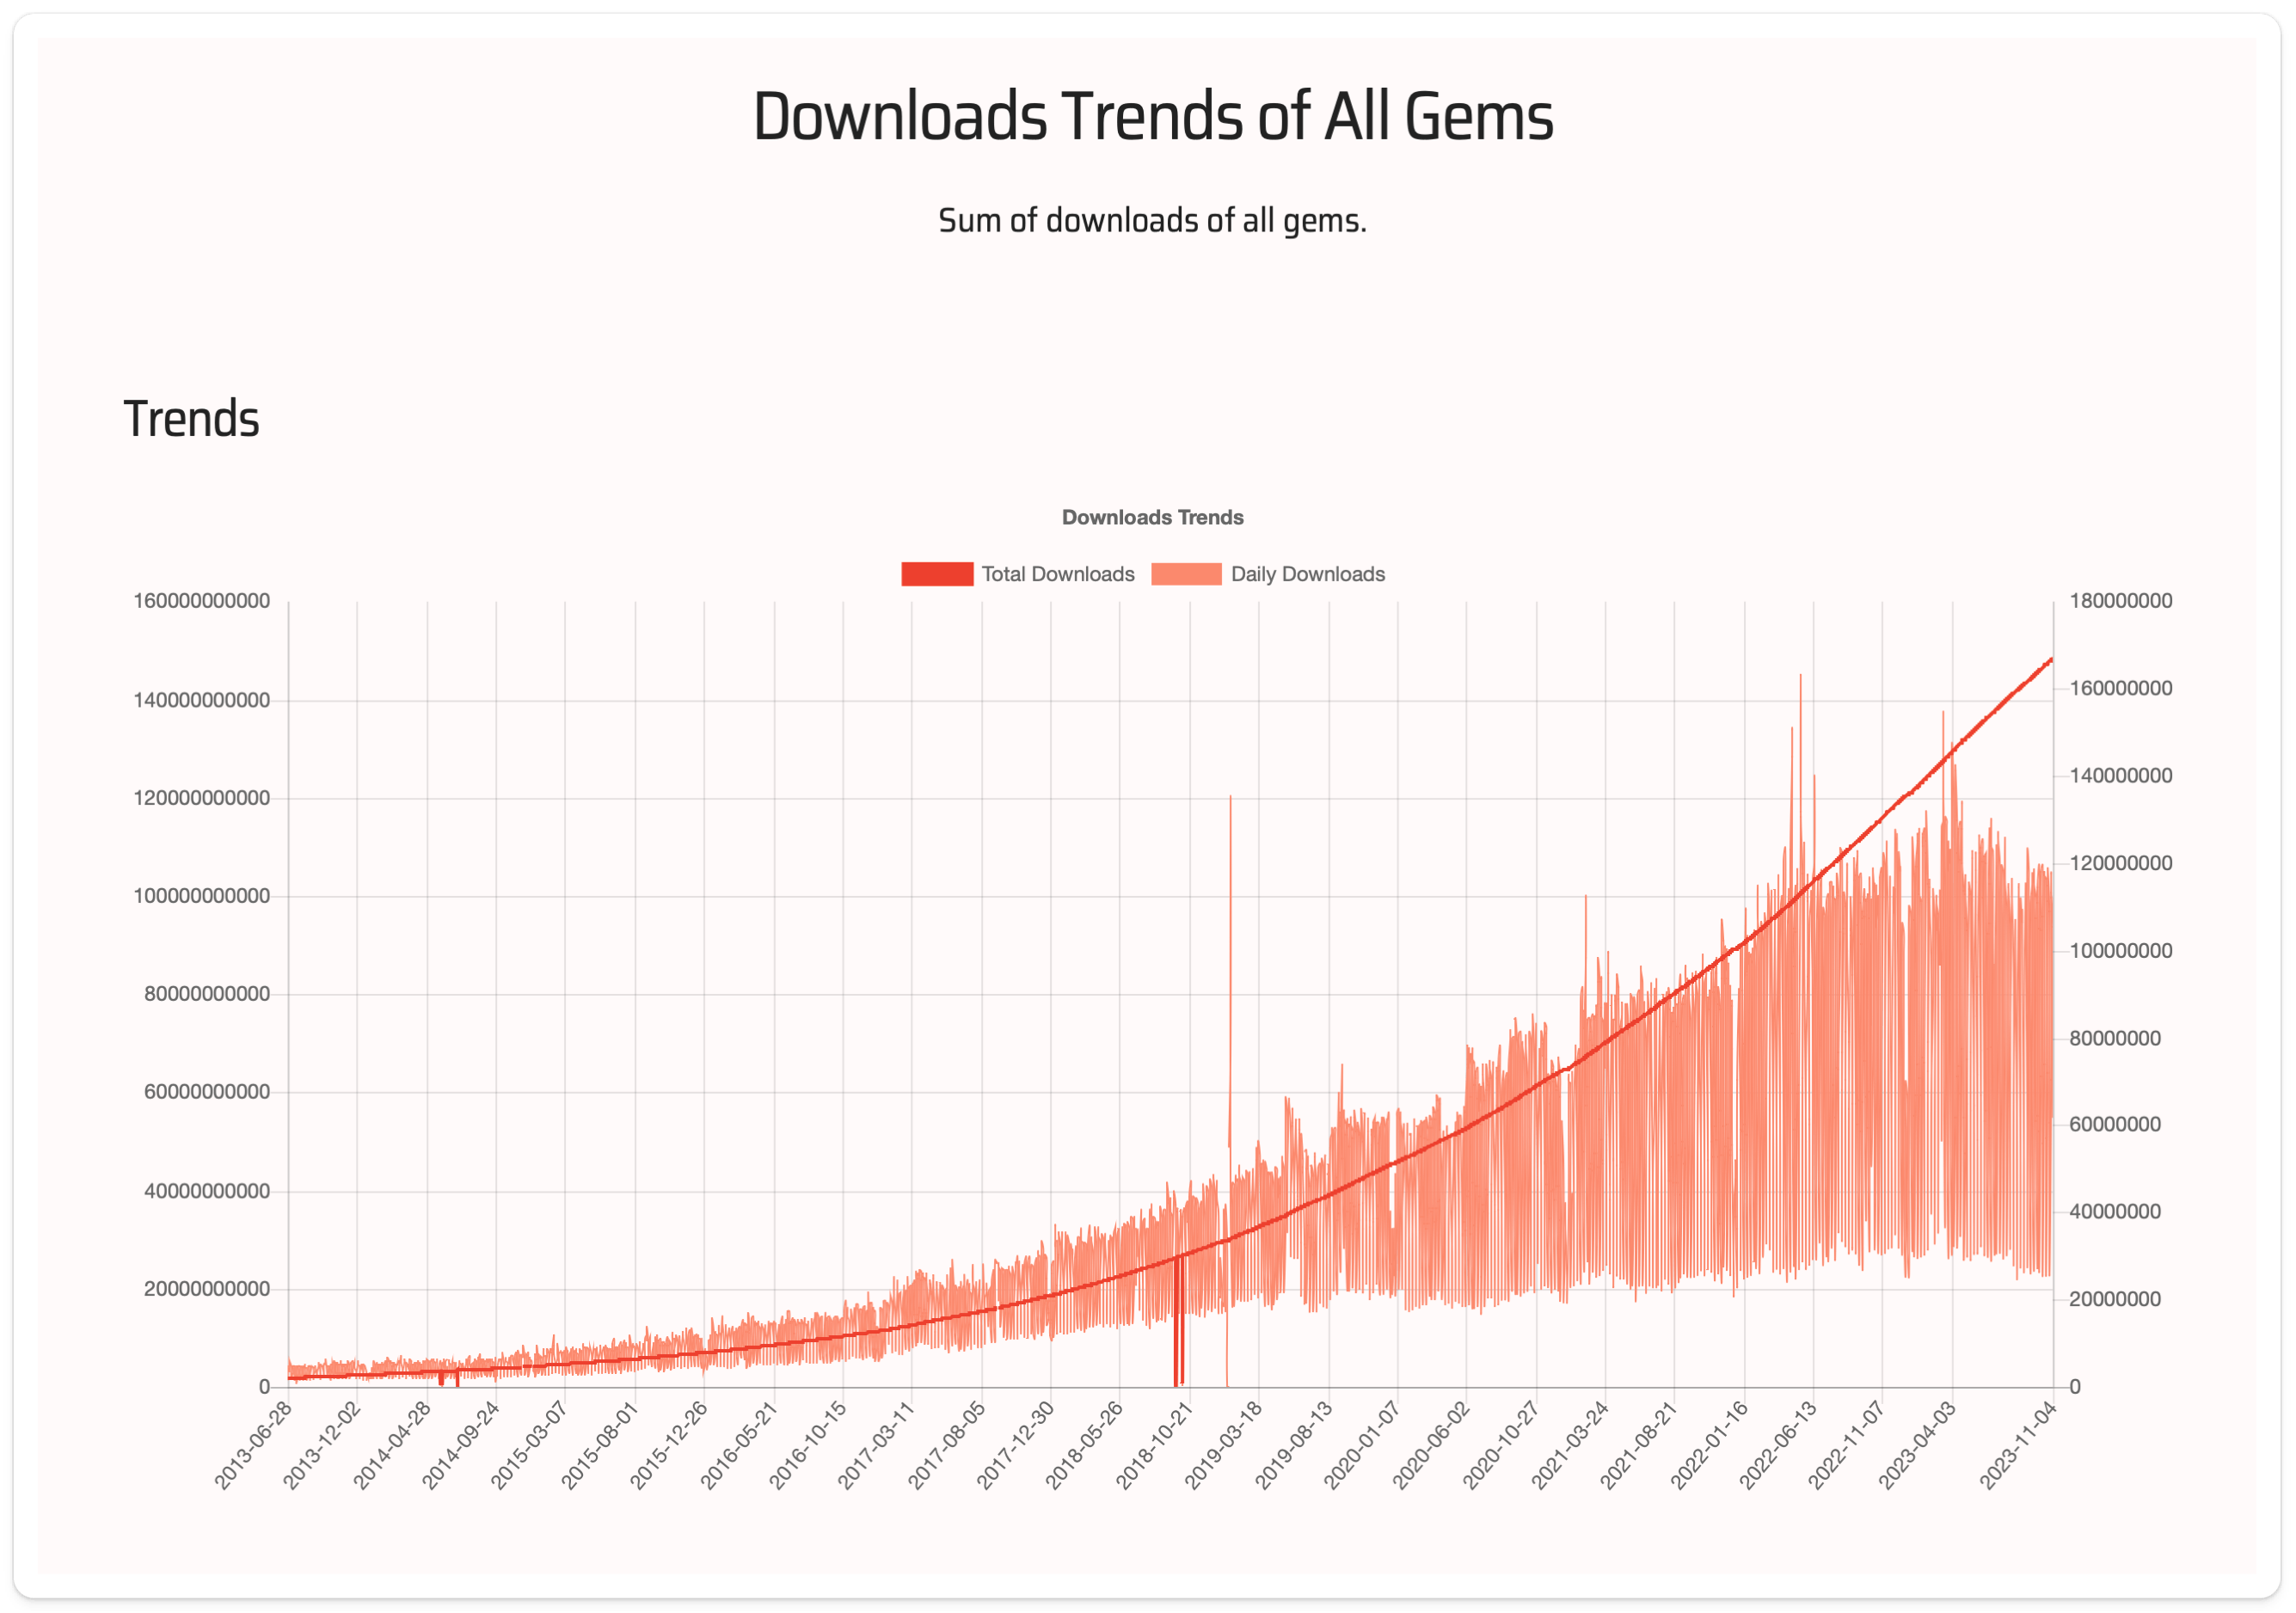 A graph showing downloads trends of all gems